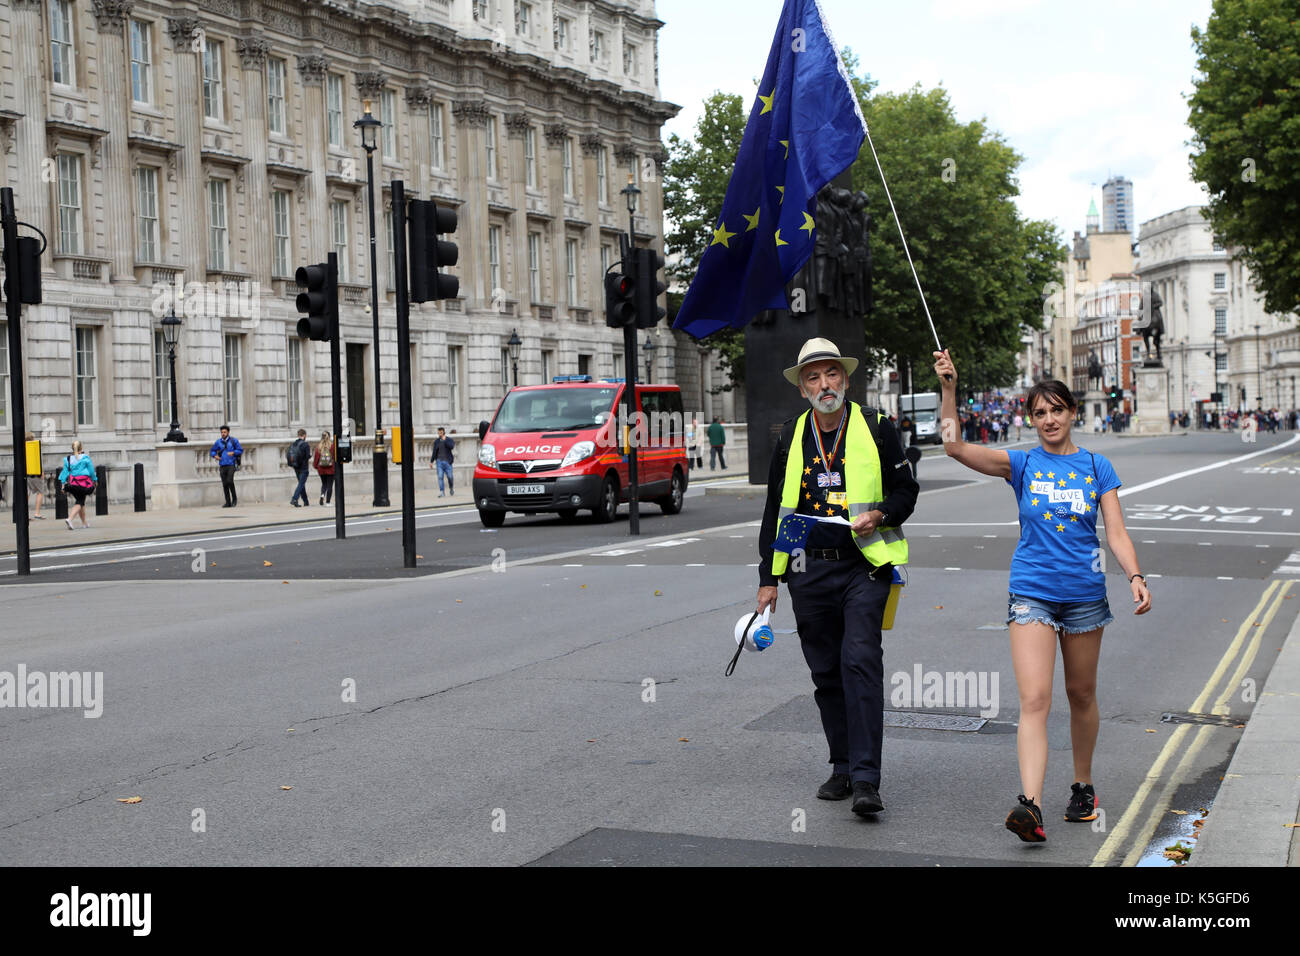 London, UK. 9th Sept, 2017. Two pro-EU demonstrators march down Whitehall, central London just ahead of the People's March for Europe, on 9 September 2017 Credit: Dominic Dudley/Alamy Live News Stock Photo